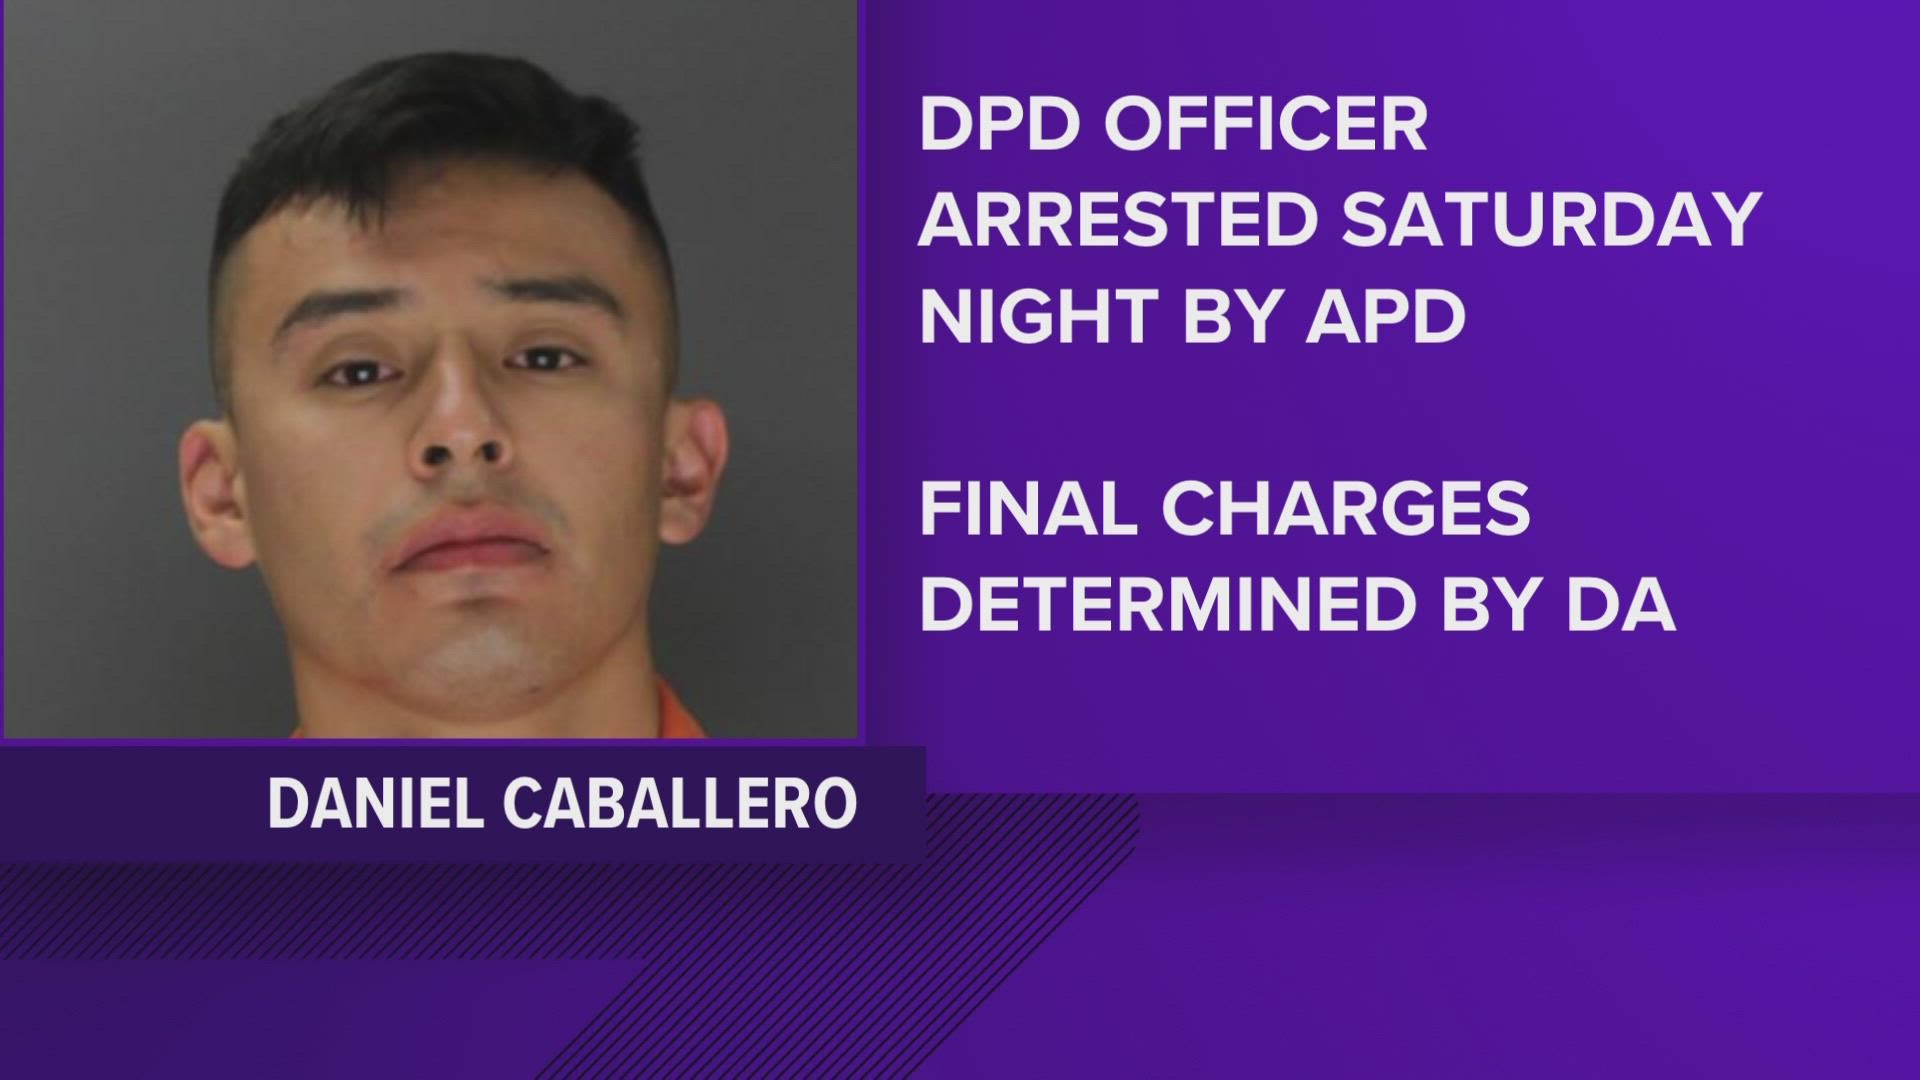 Officer Daniel Caballero was fired after being arrested on charges of harassment, menacing and prohibited use of weapons, DPD said.